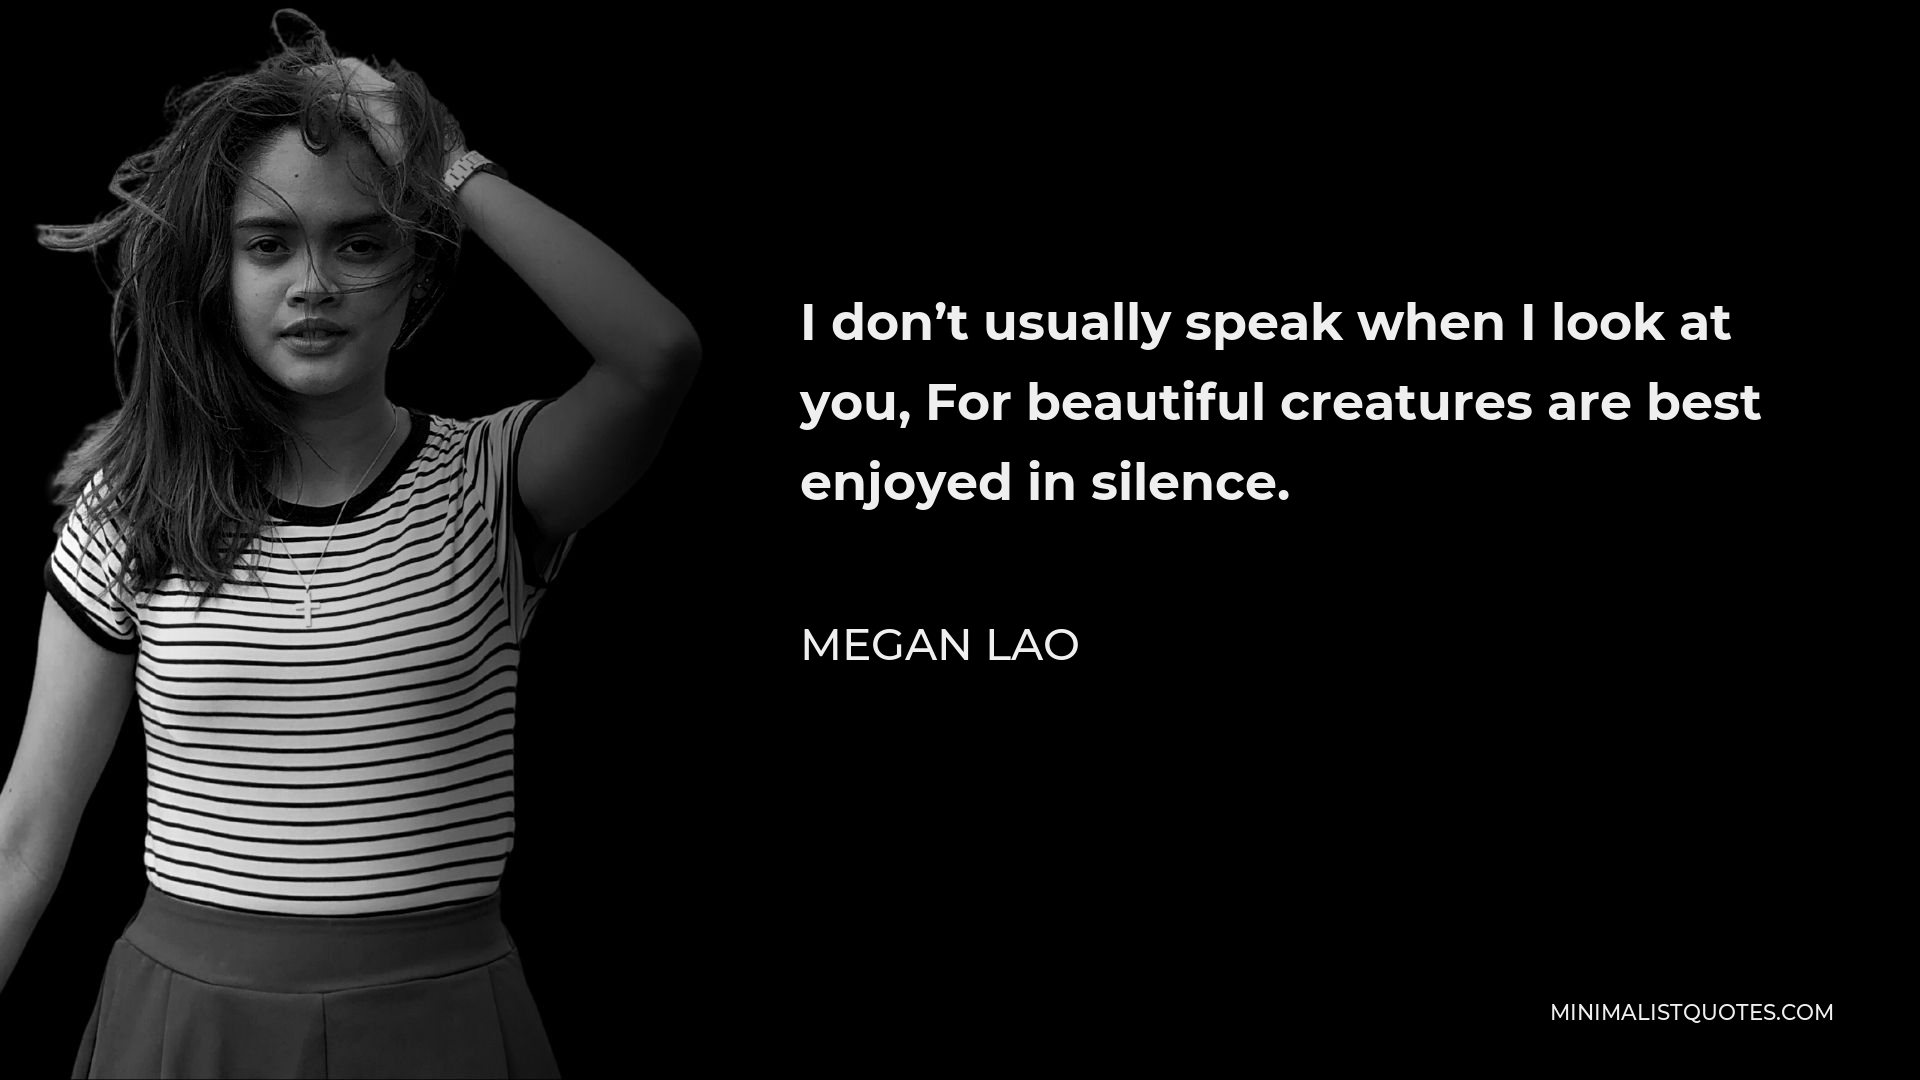 Megan Lao Quote - I don’t usually speak when I look at you, For beautiful creatures are best enjoyed in silence.